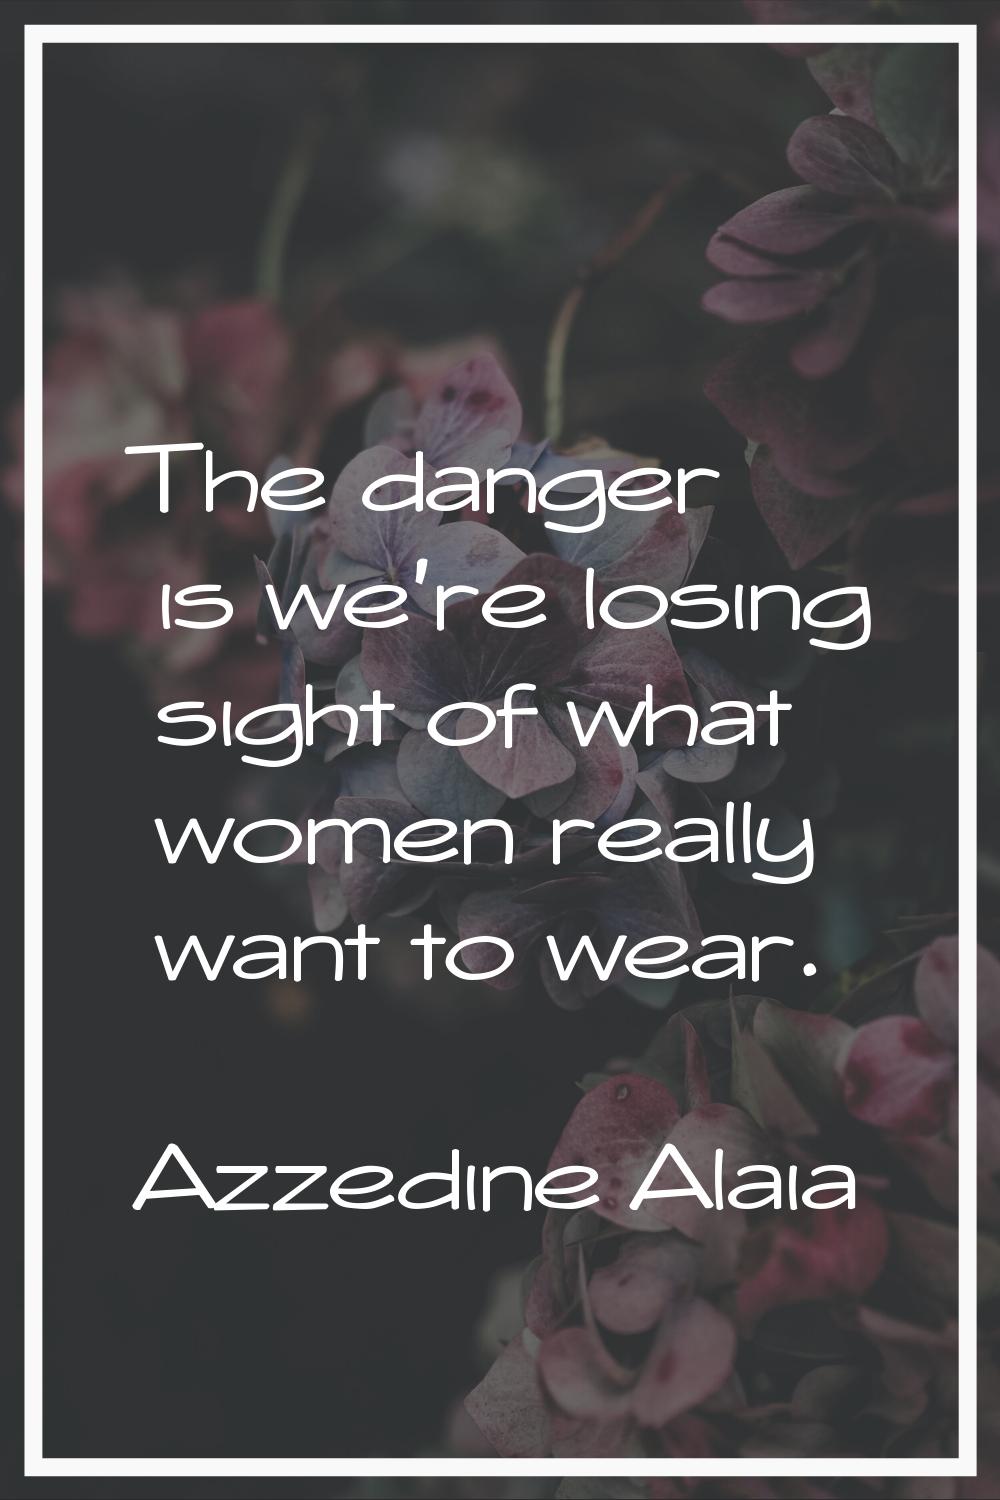 The danger is we're losing sight of what women really want to wear.